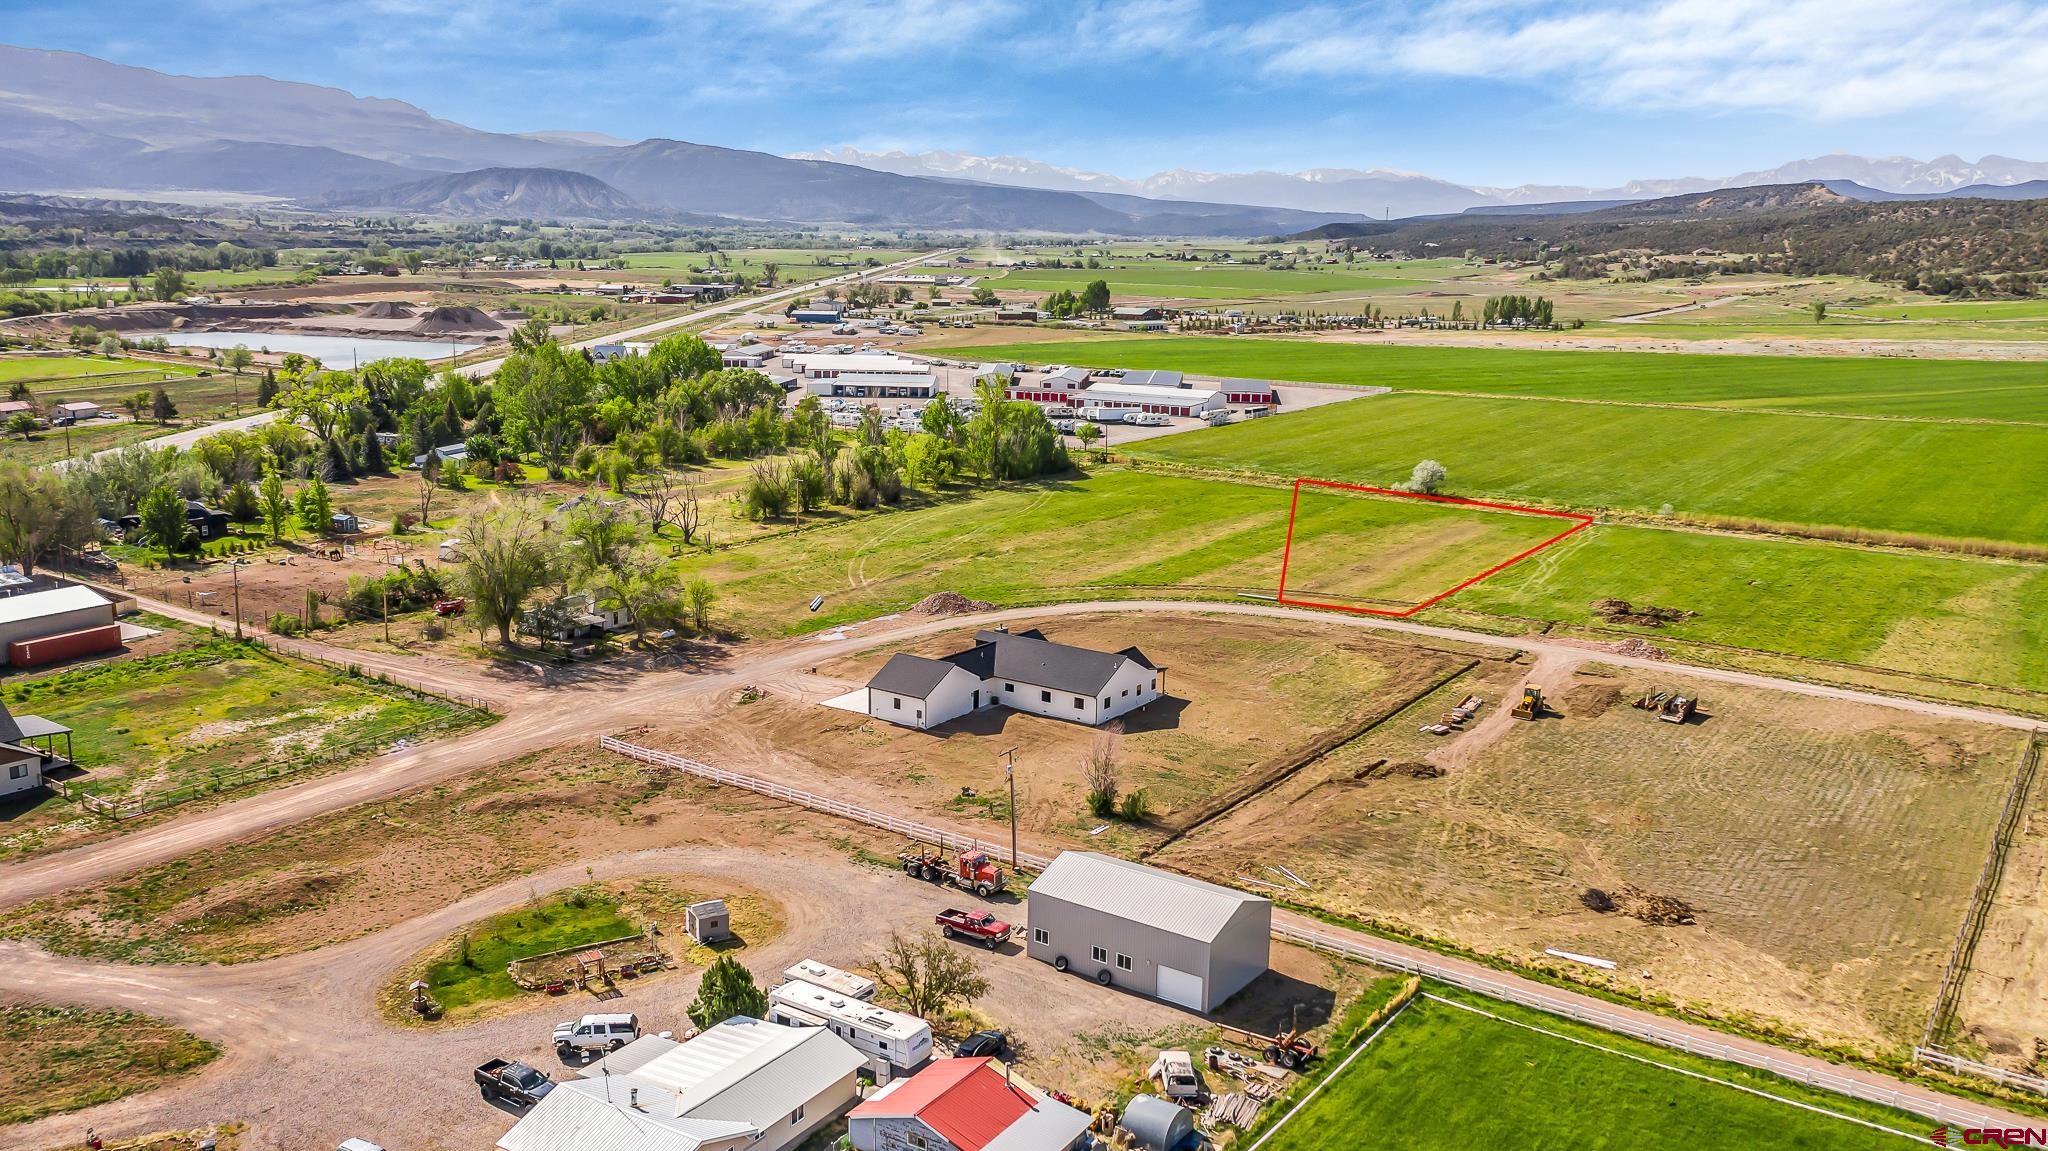 Photo of Tbd Lot 1 Ute Valley Dr in Montrose, CO